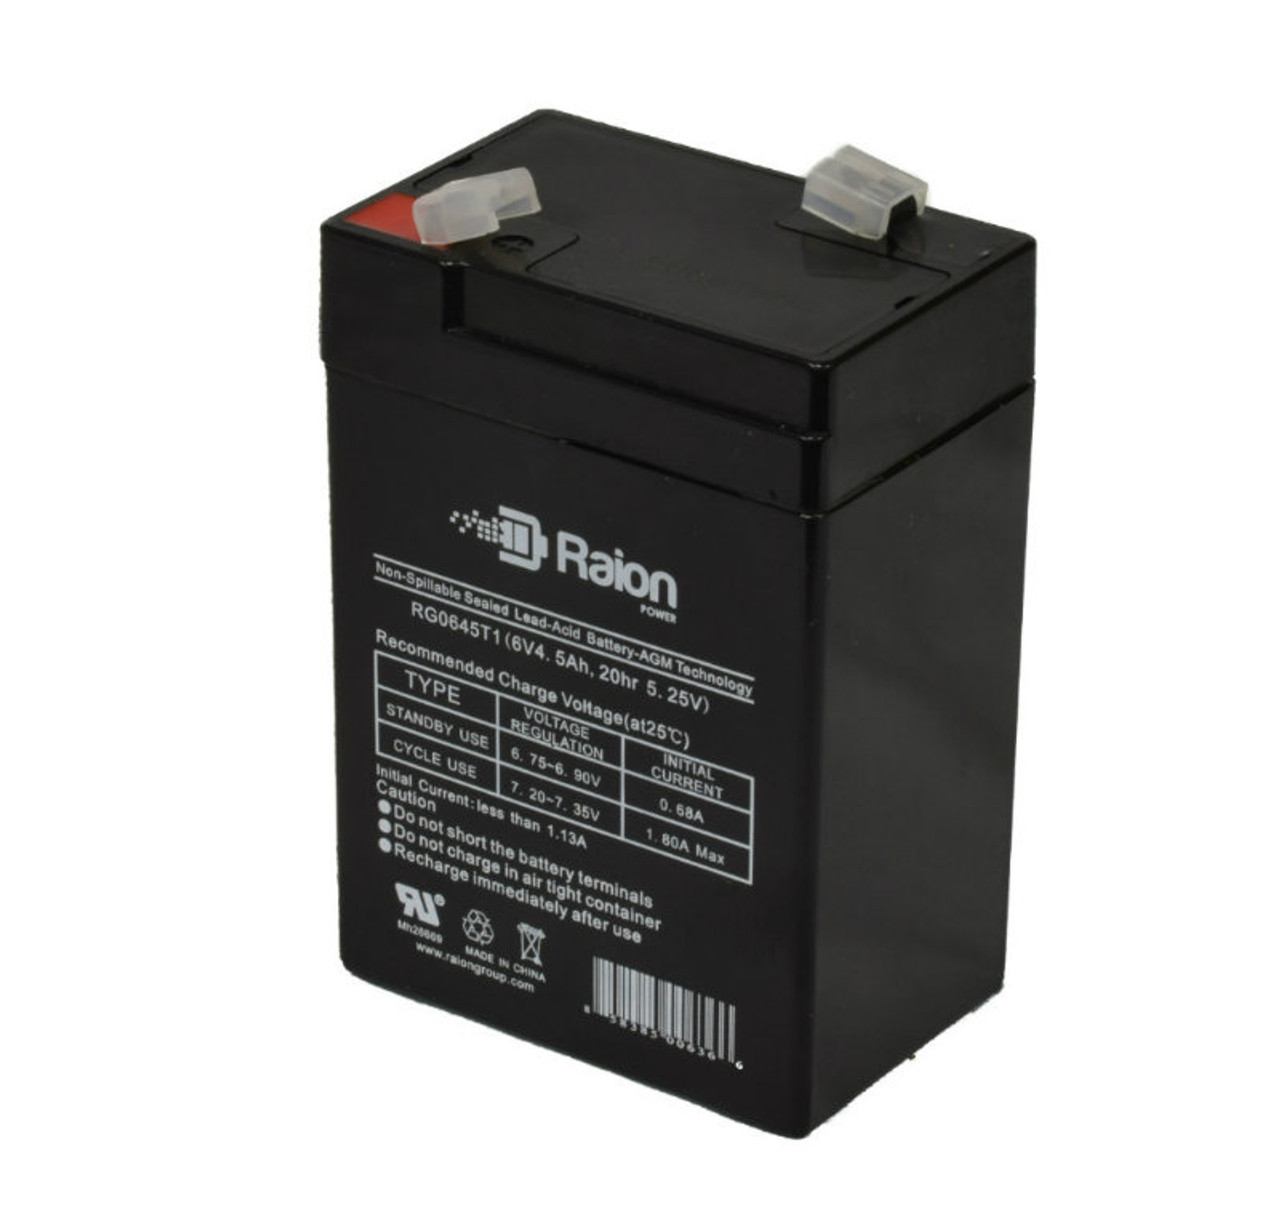 Raion Power RG0645T1 6V 4.5Ah Replacement Battery Cartridge for Palma PM4A-6